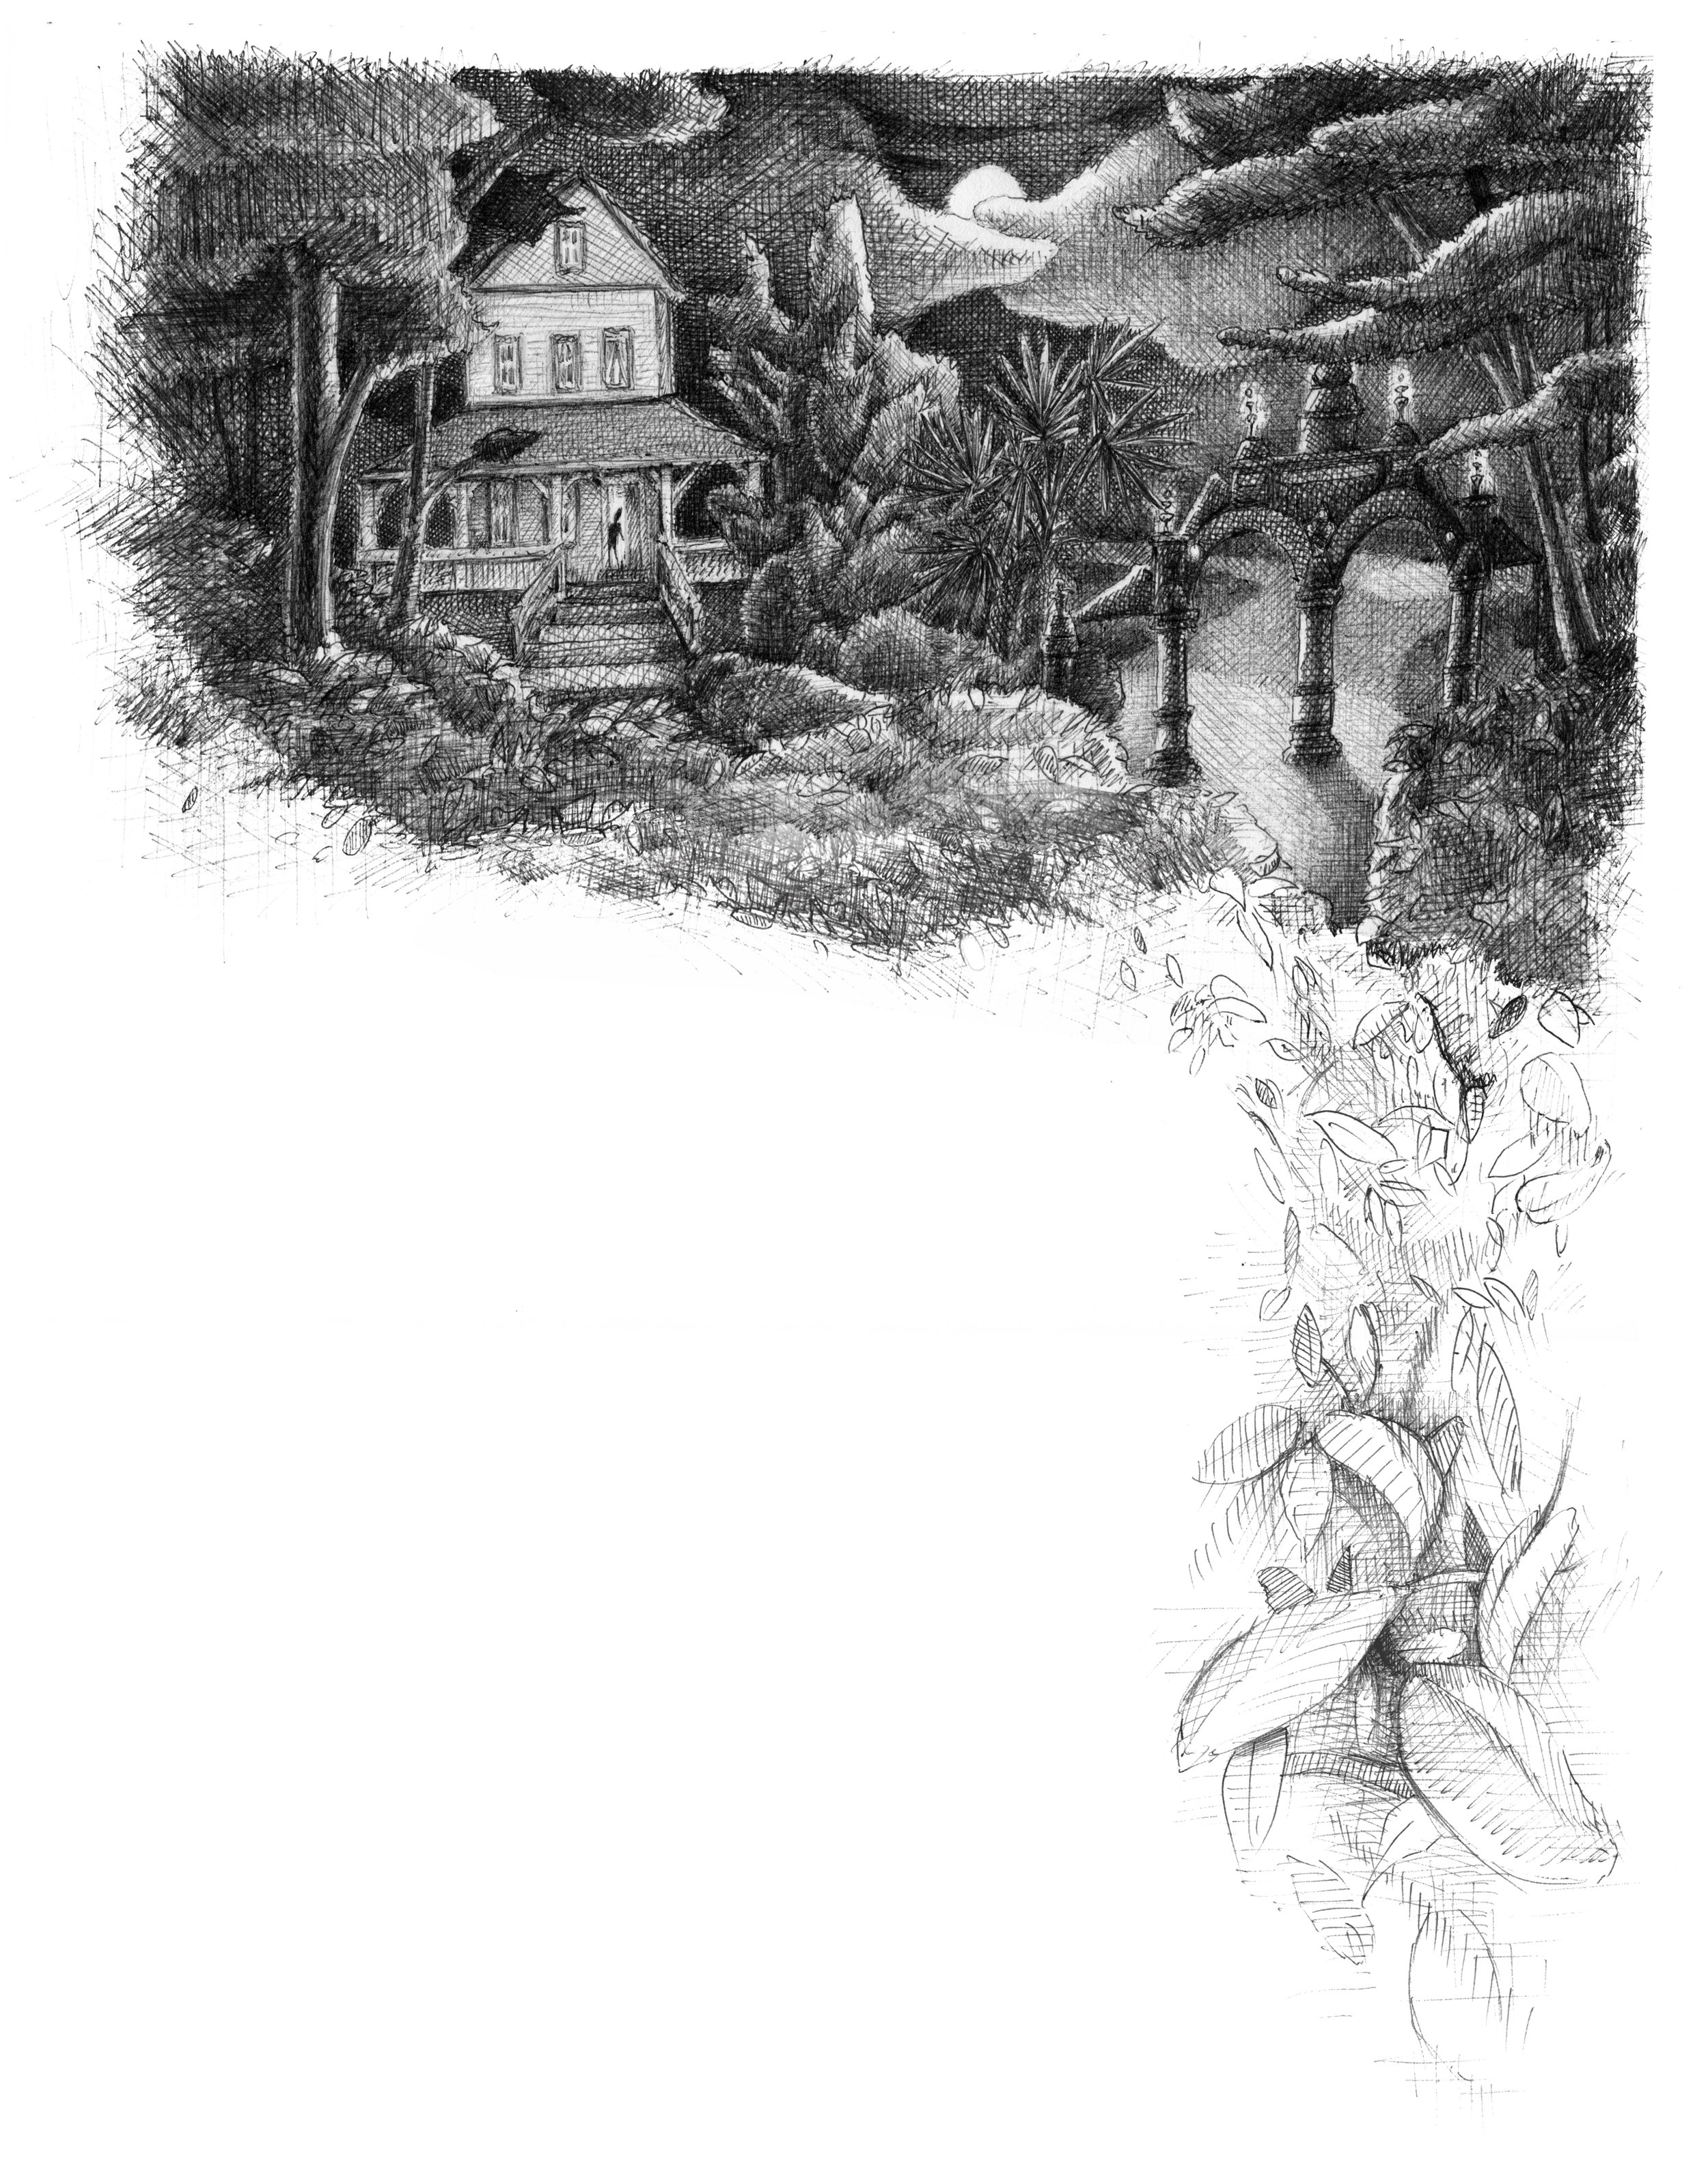   Riddle House  ink on paper. 2022    commissioned by Arts &amp; Culture of Palm Beach for Haunted History Fall 2022   